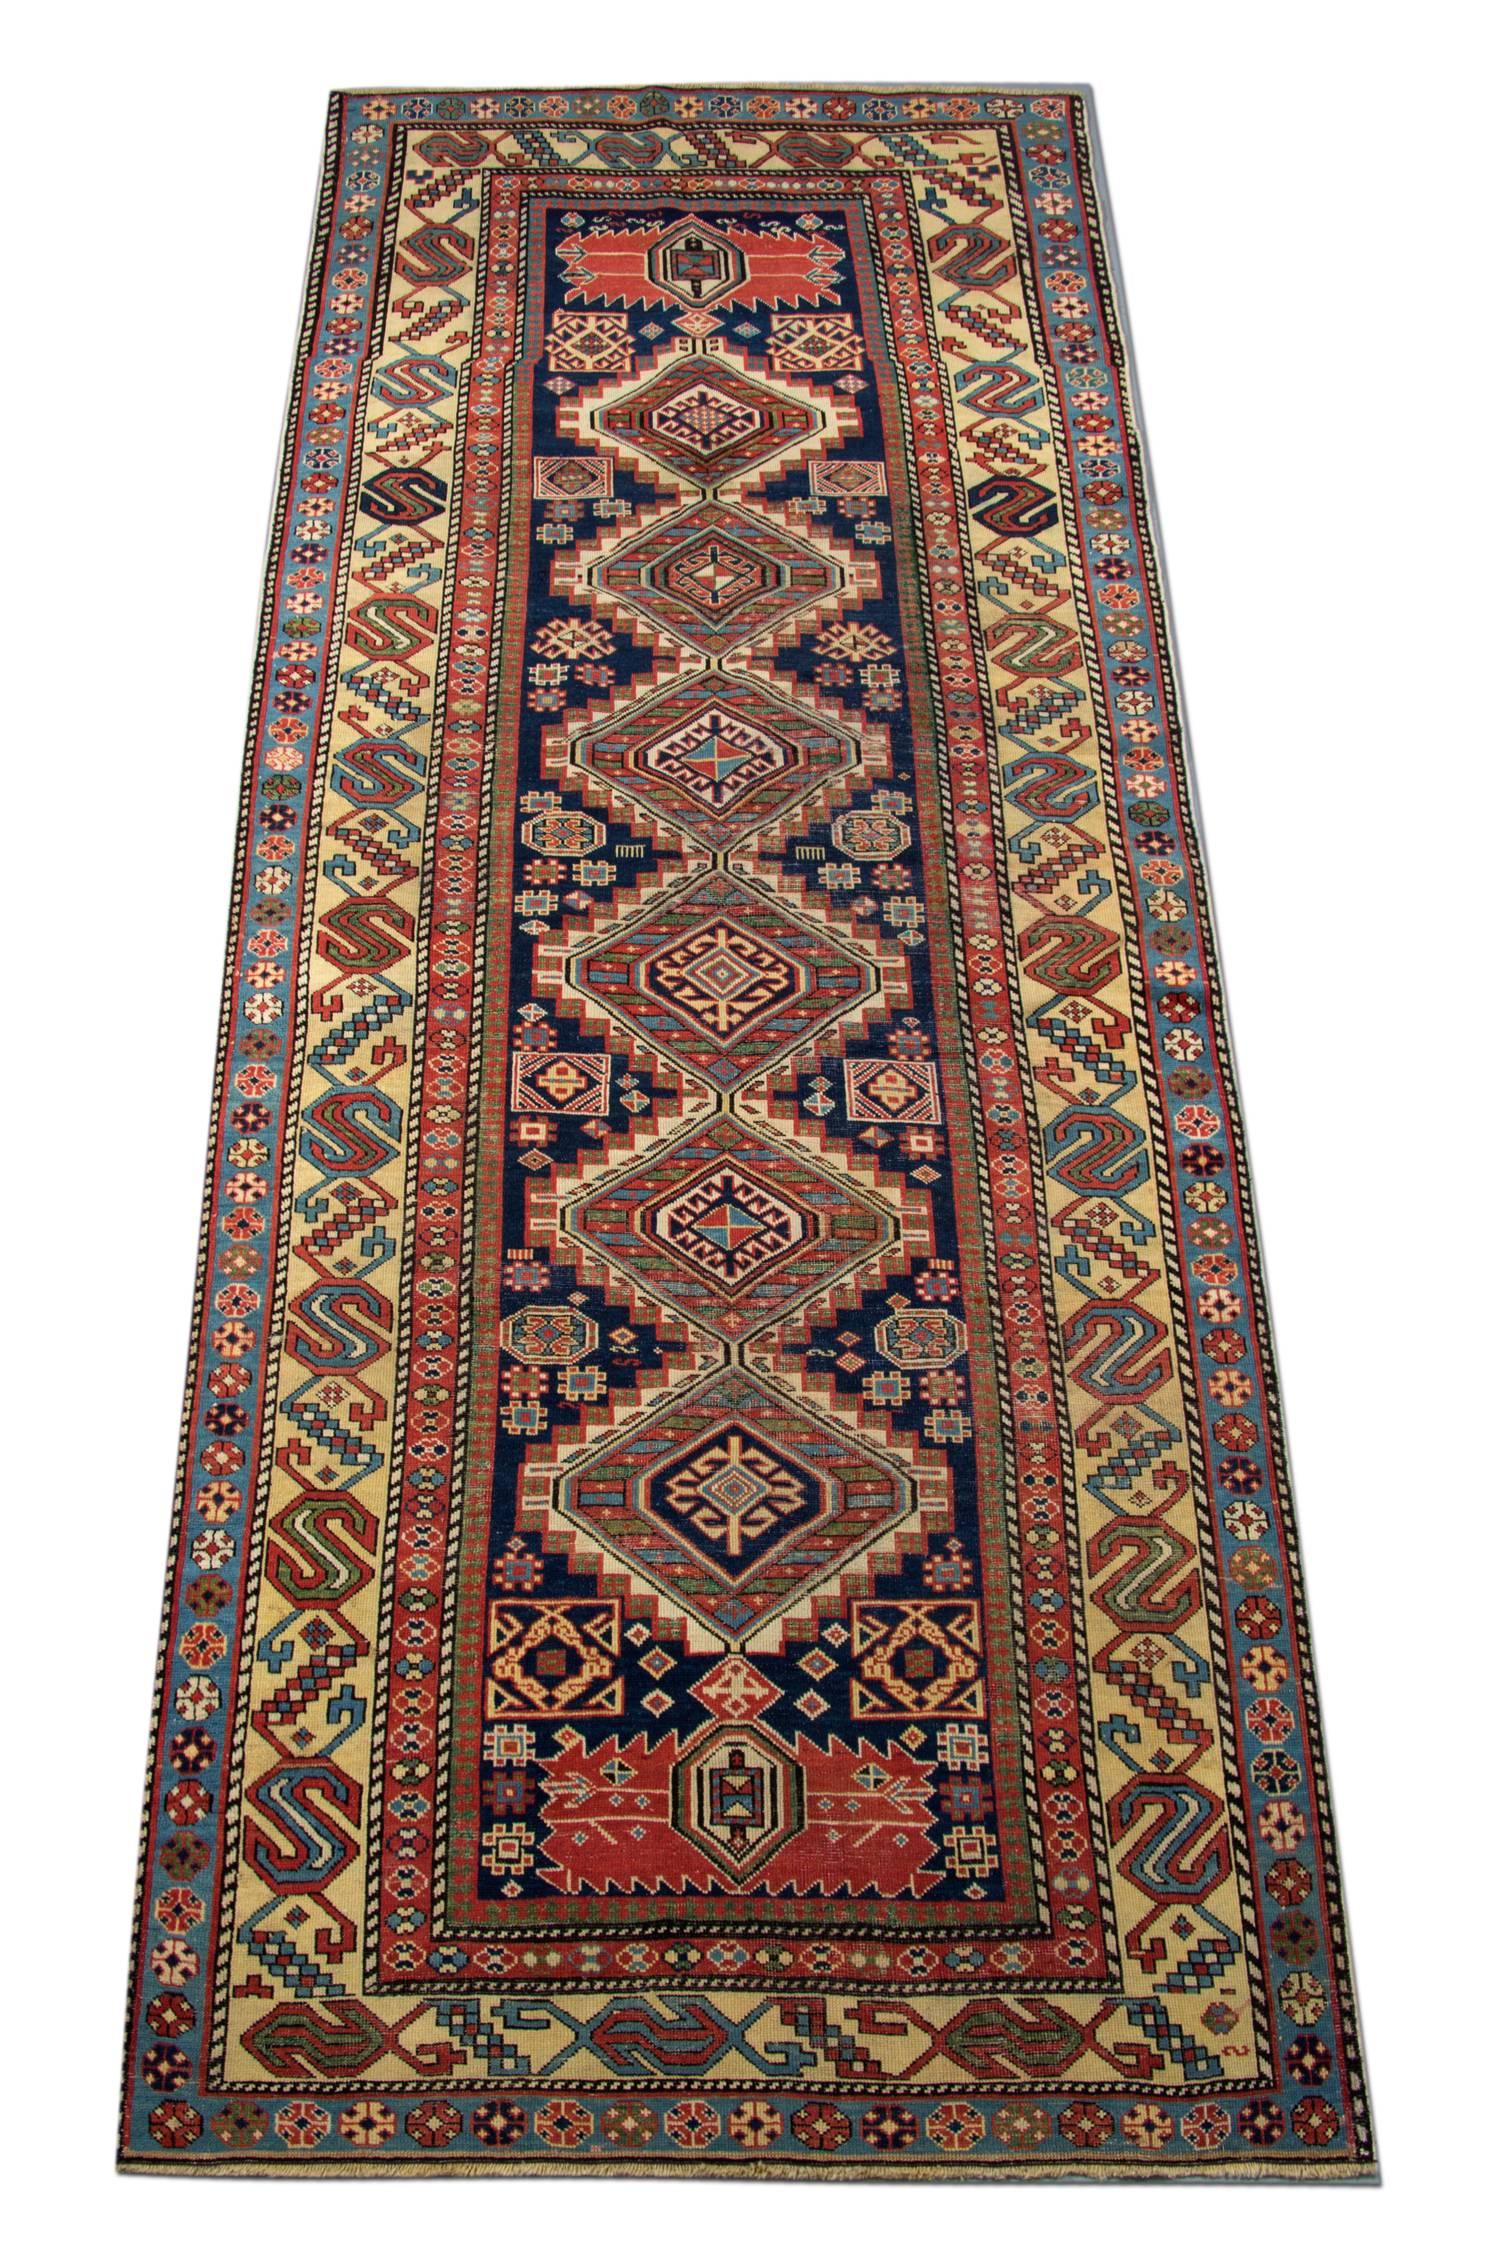 This handmade carpet colourful Rug is a Turkish carpet rug has woven by very skilled weavers in Turkey, who used the highest quality wool and cotton. The flat-weave rug has a light orange, orange, green, white, cream, gold, blue, yellow and dark